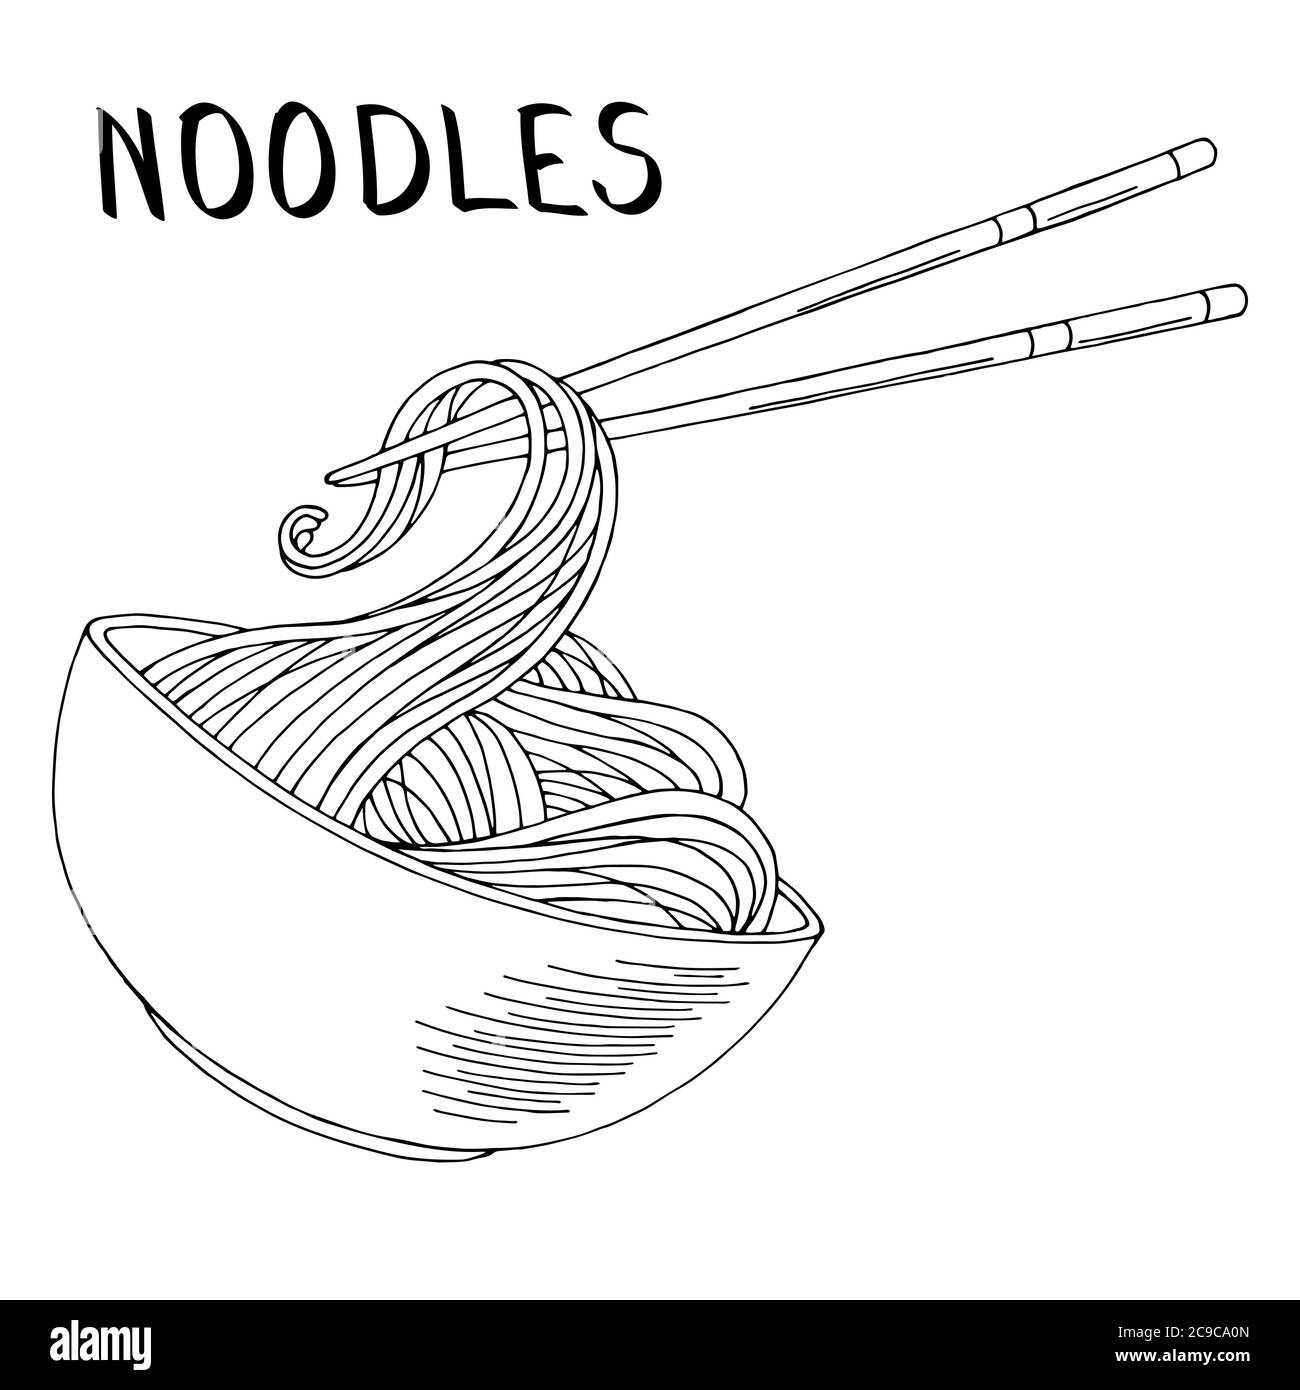 Noodles graphic fast food black white sketch isolated illustration vector Stock Vector